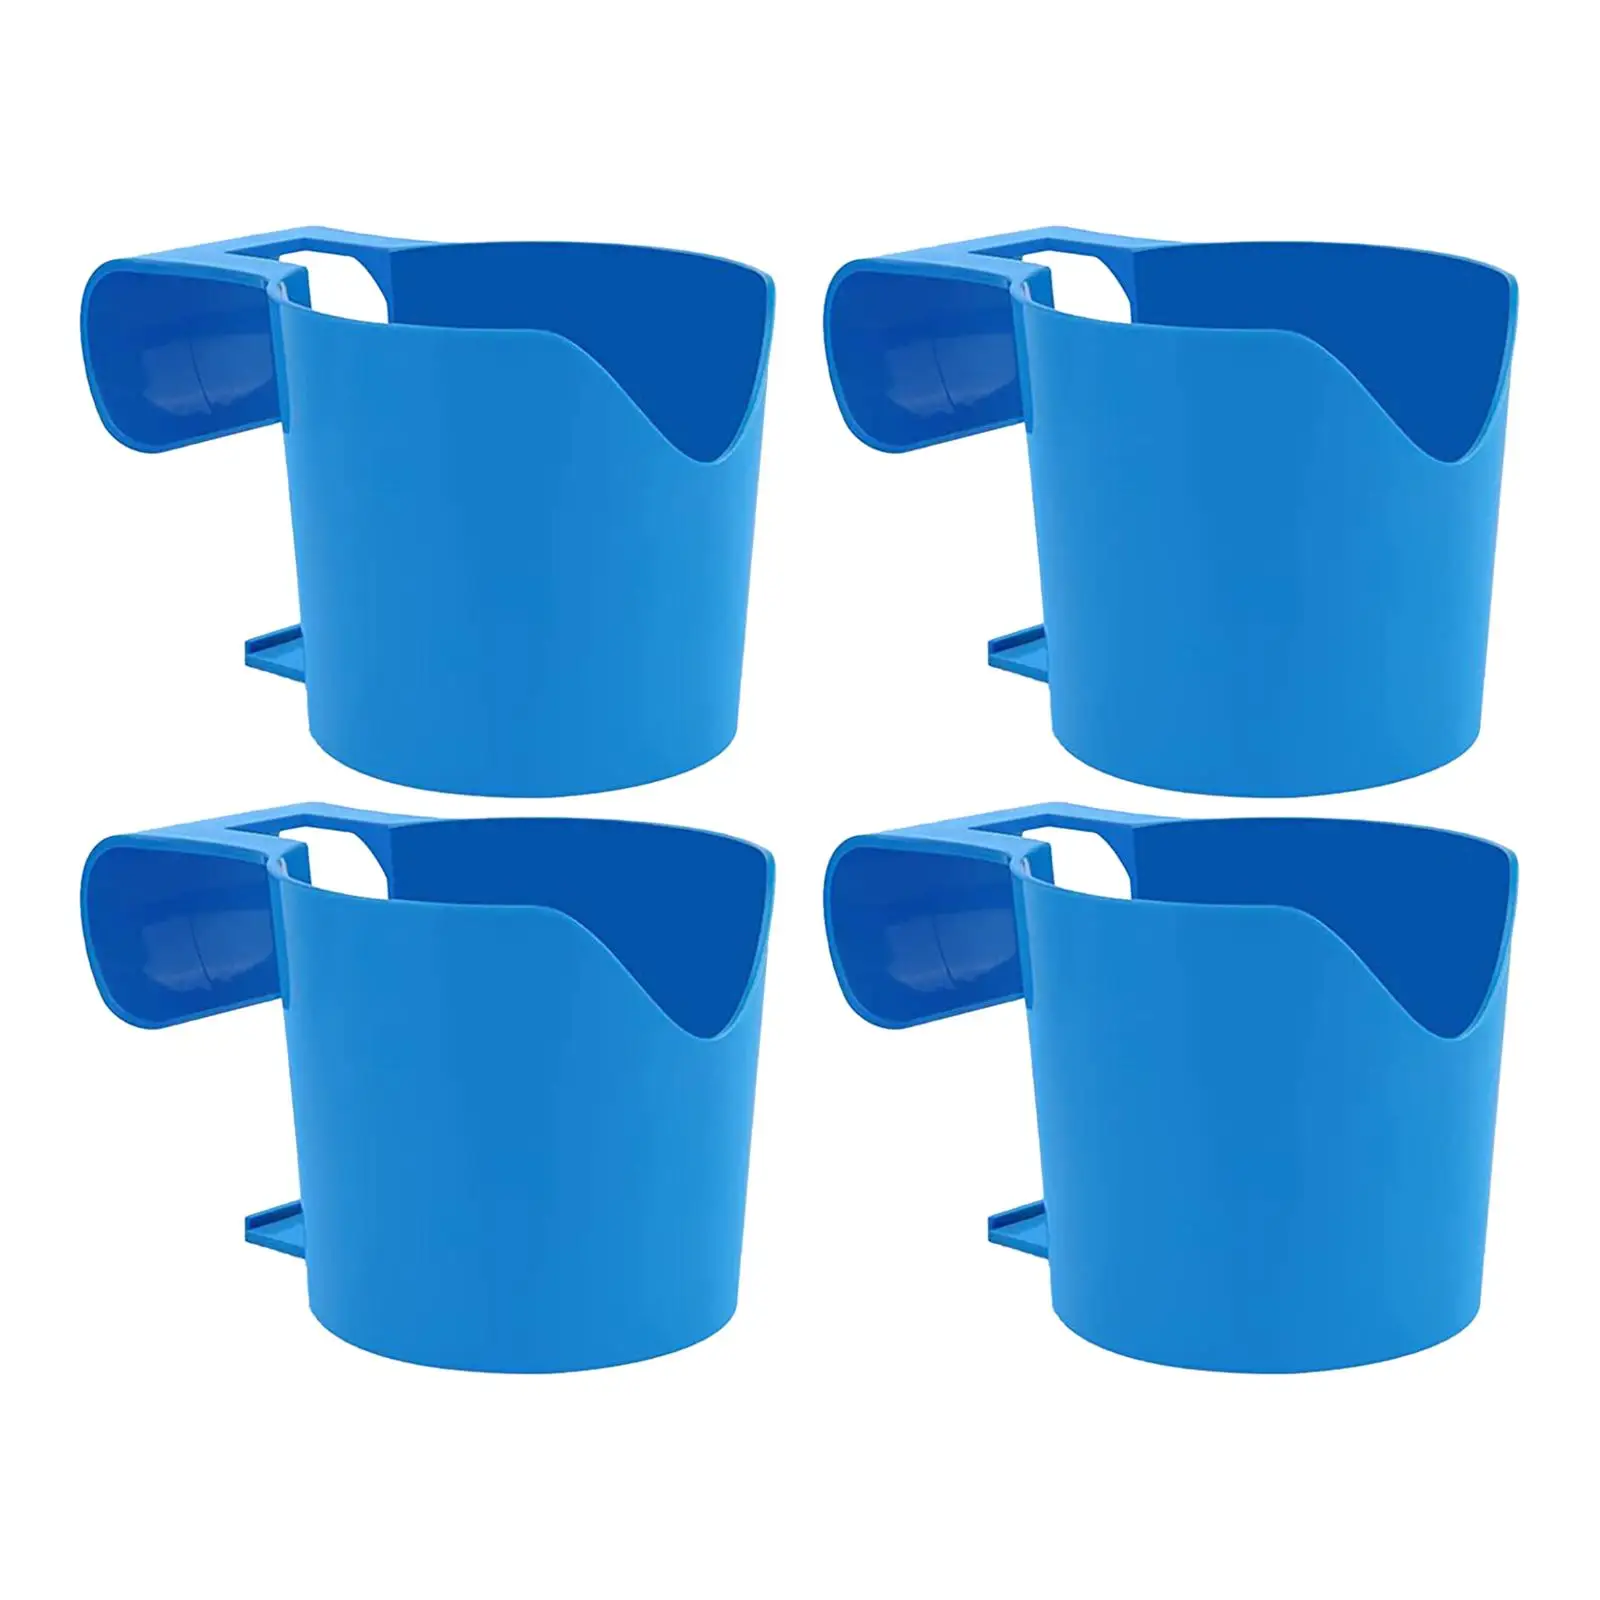 4x Poolside Cup Holders Portable Container Hook Pool Drink Holder Clip on for Spa Drinks Beverage Inflatable Hot Tub